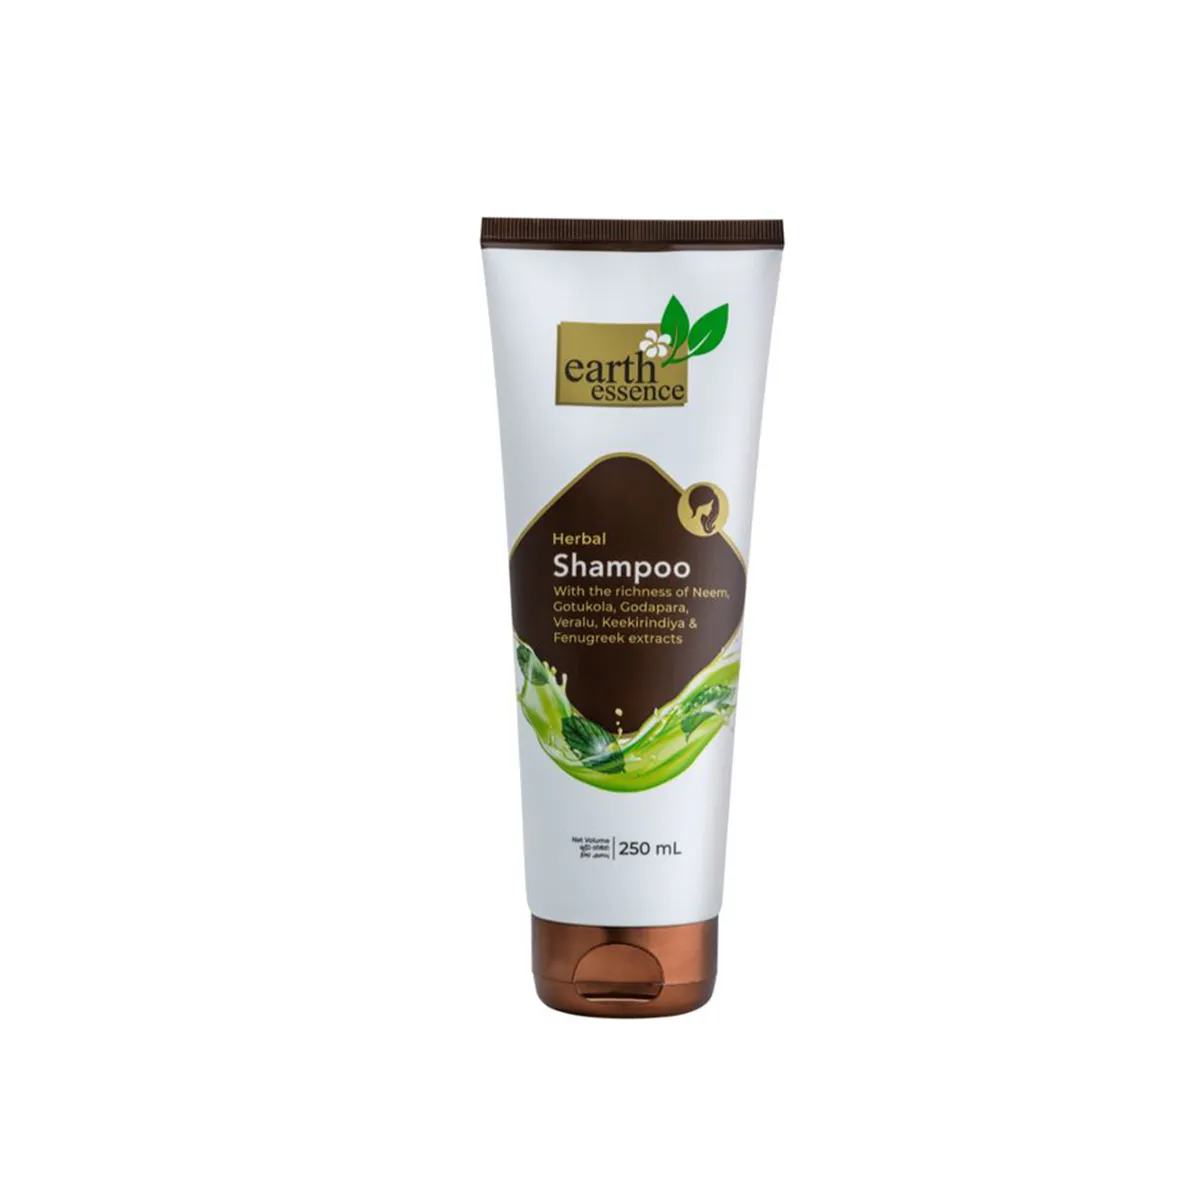 First product image of Earth Essence Herbal Shampoo 250ml